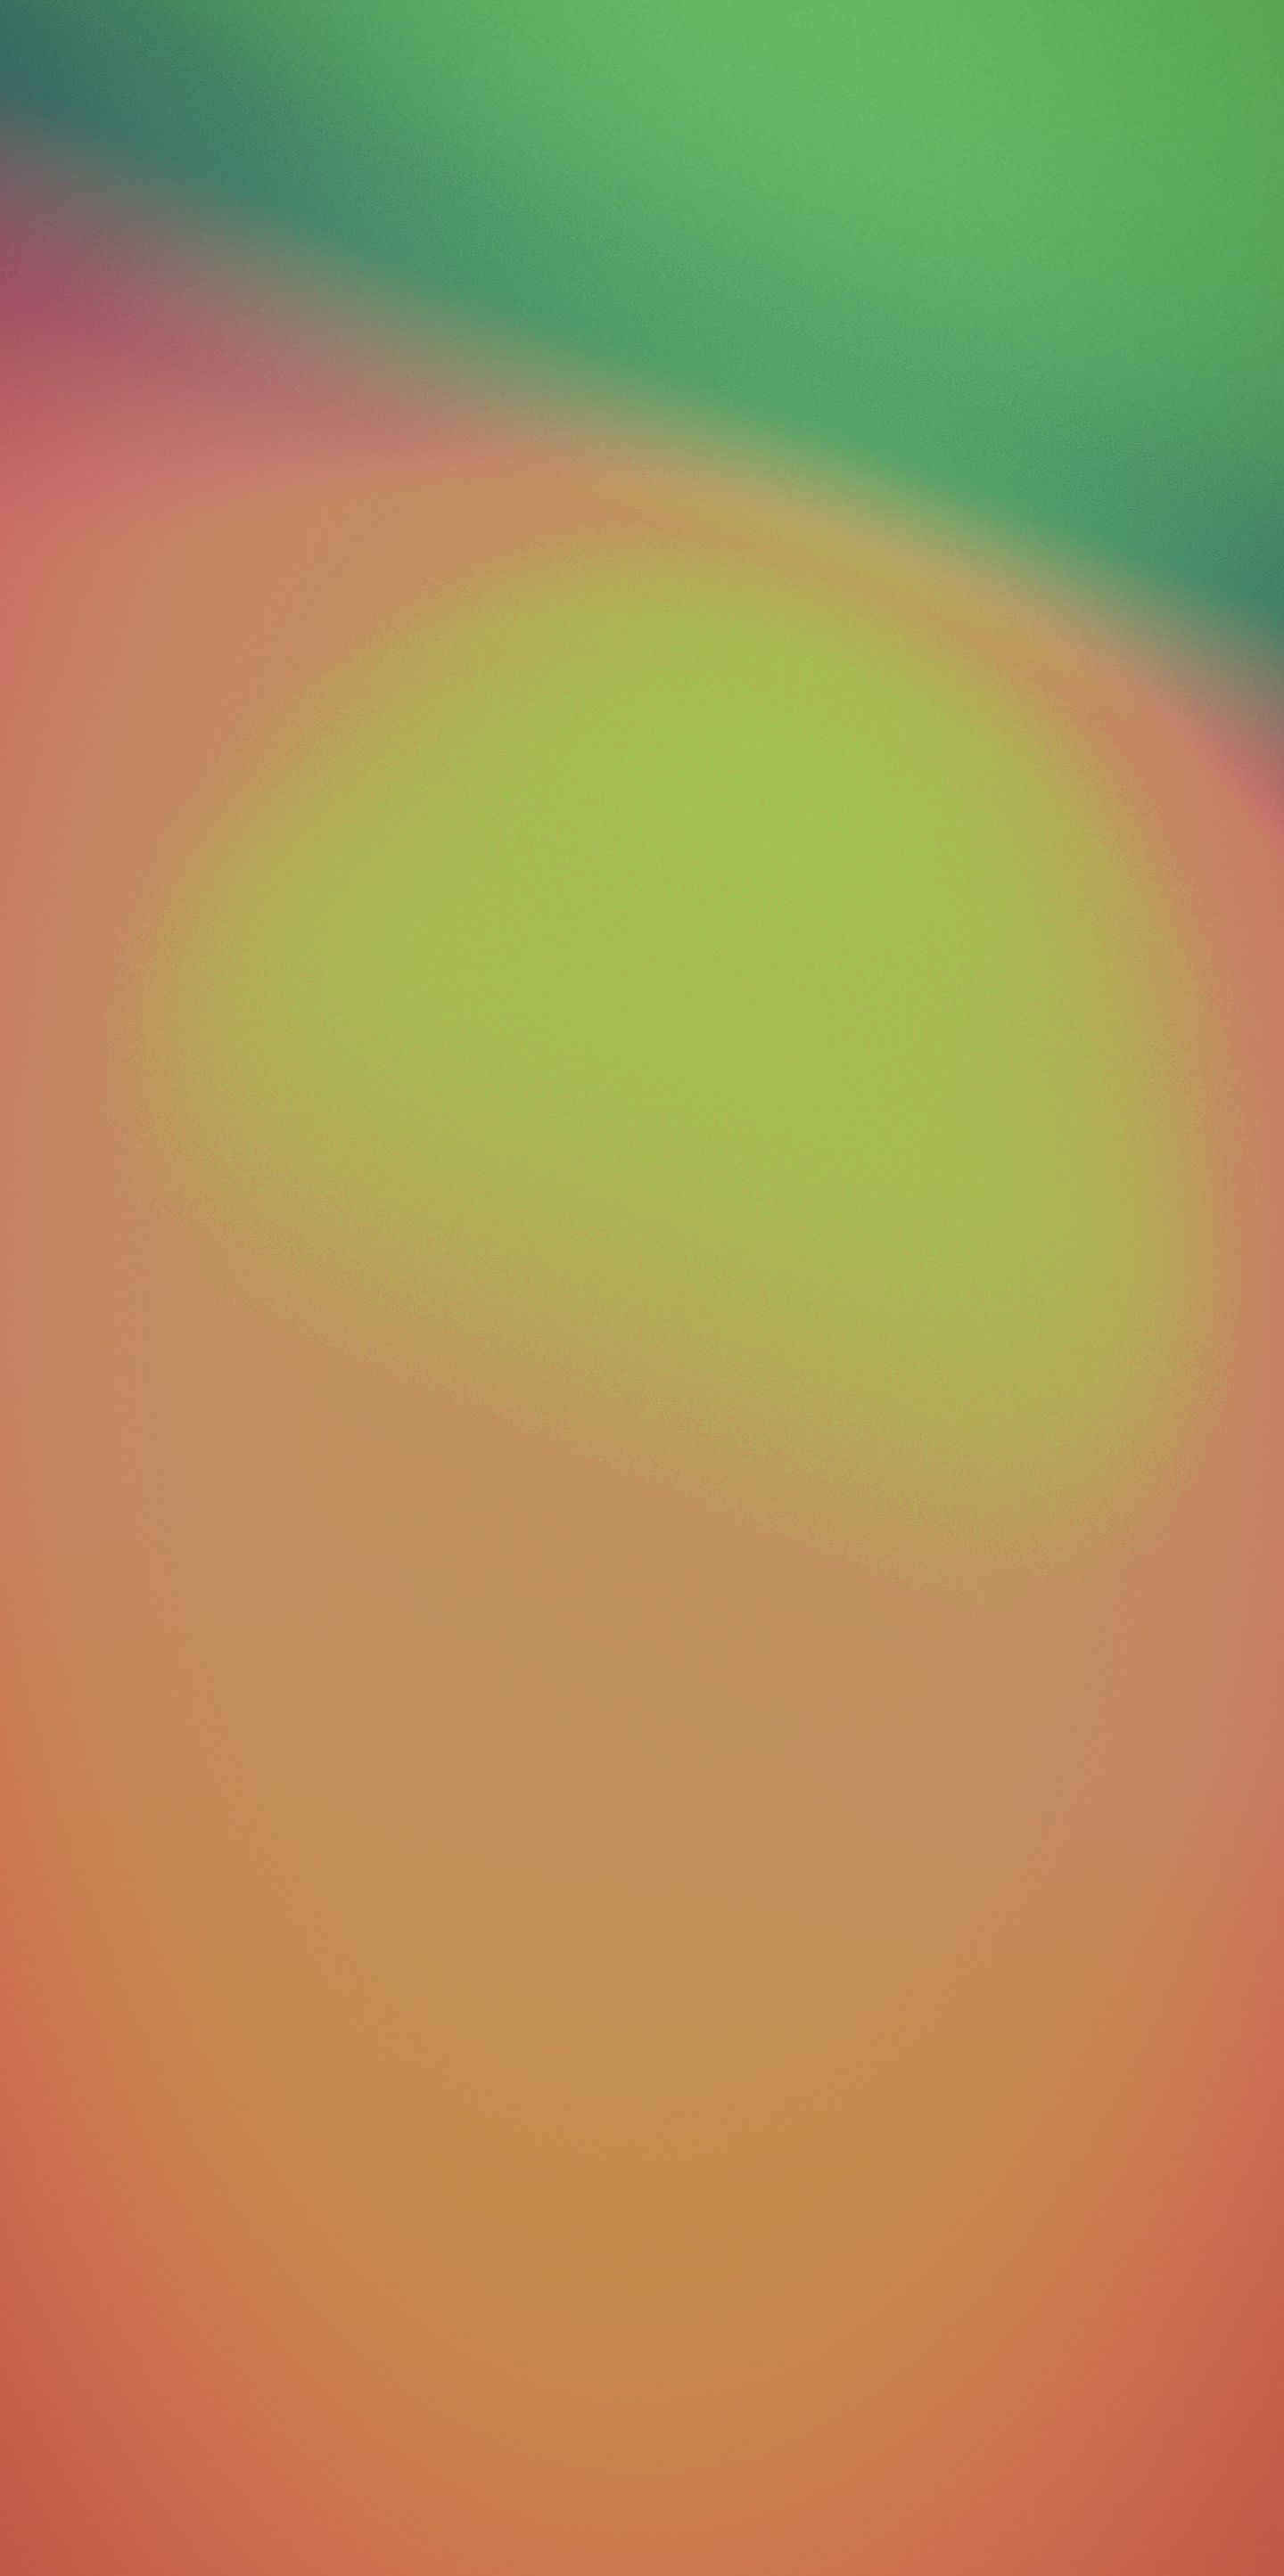 A colorful abstract background with a gradient of green, orange, and pink. - Gradient, bright